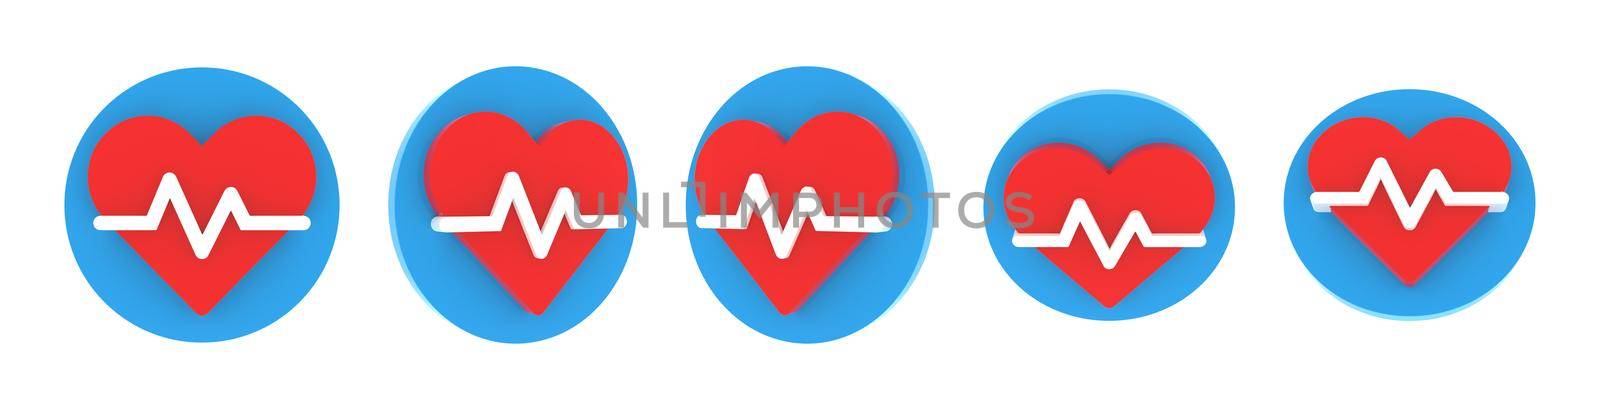 Volumetric round medical icon set, 3d rendering illustration by clusterx